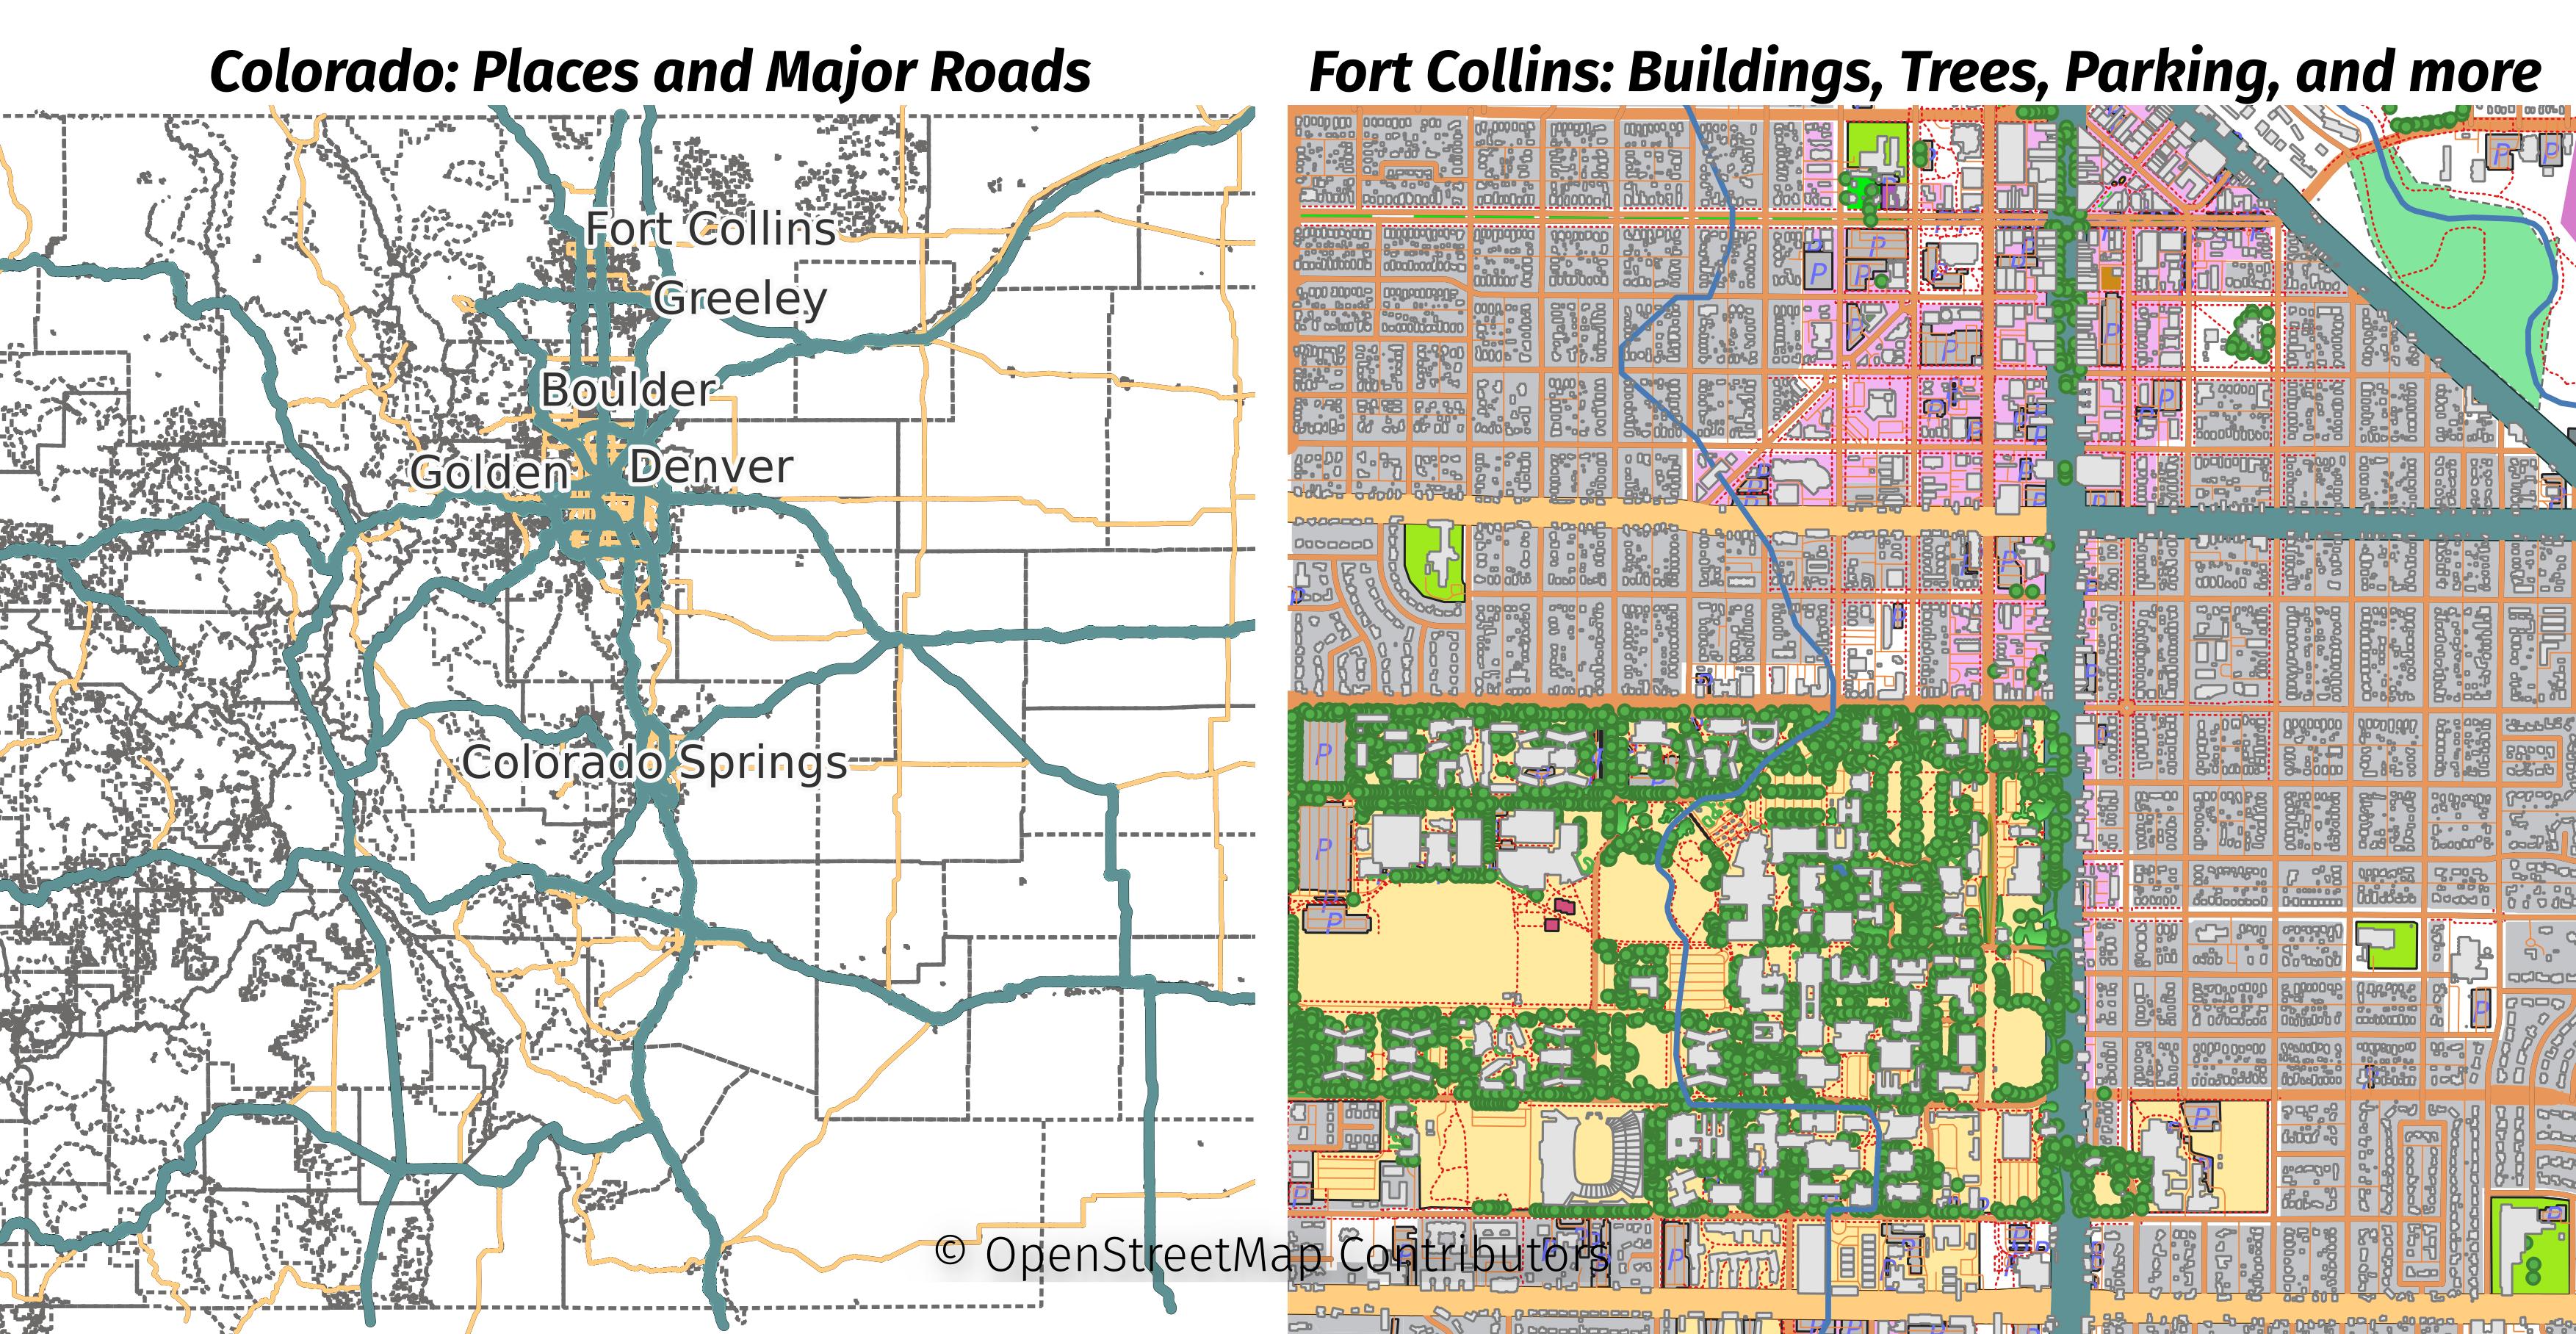 Image with two maps. The map on the left is a map showing most of Colorado showing place boundaries and major roadways.  The map on the right is a closer view in Fort Collins, Colorado, showing a portion of Colorado State University's campus and residential areas.  The map on the right has details of minor roadways, sidewalks, buildings, and even trees.